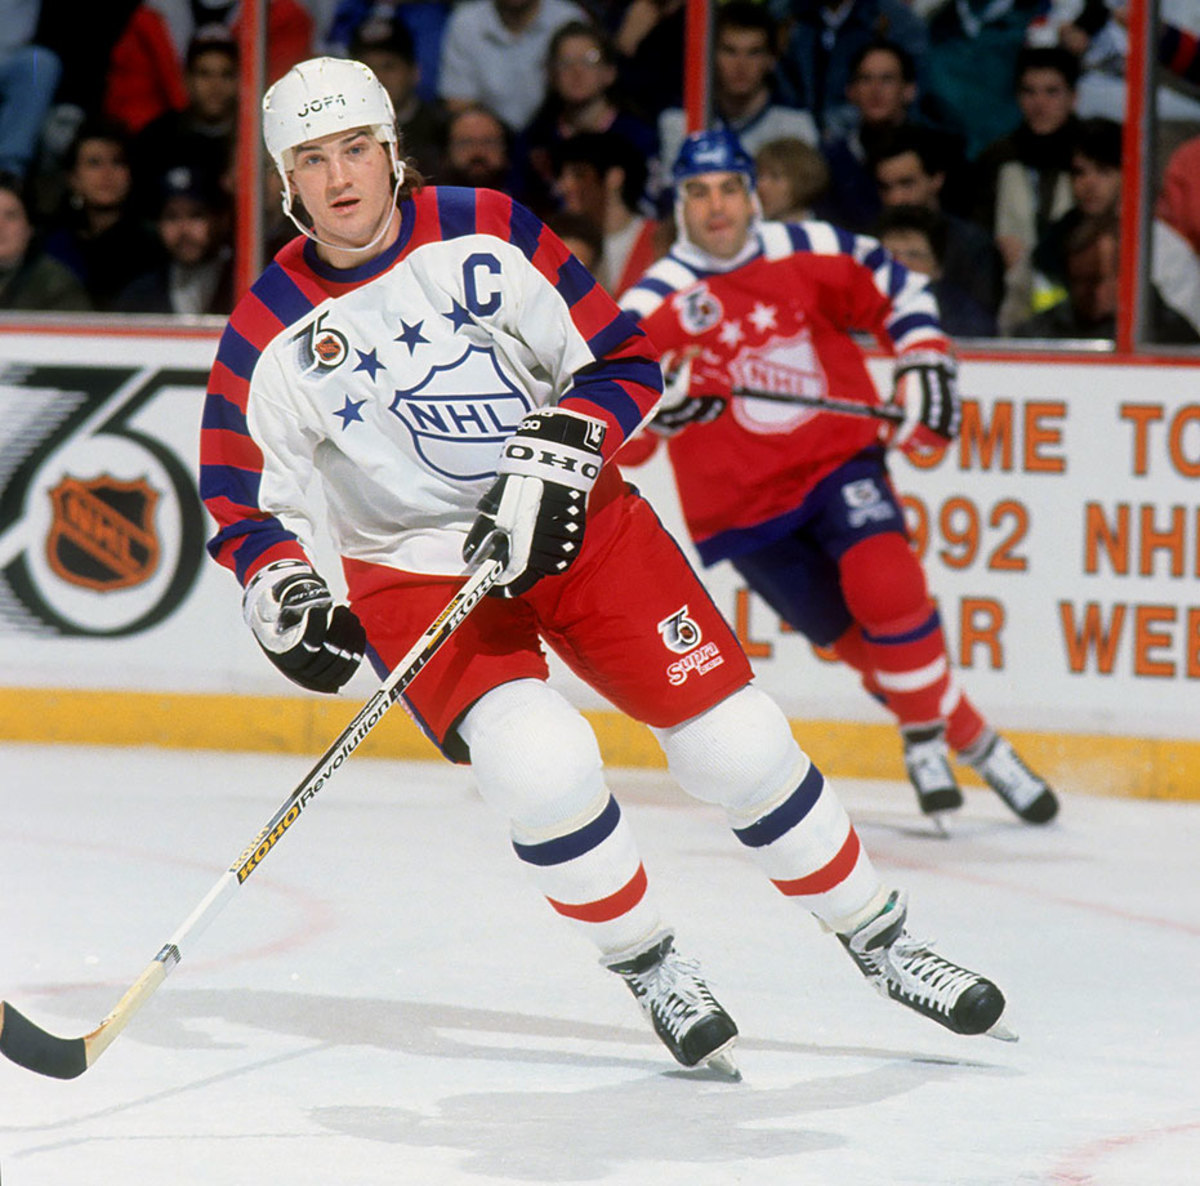 Remember those? Memorable NHL All-Star Game jerseys over the years